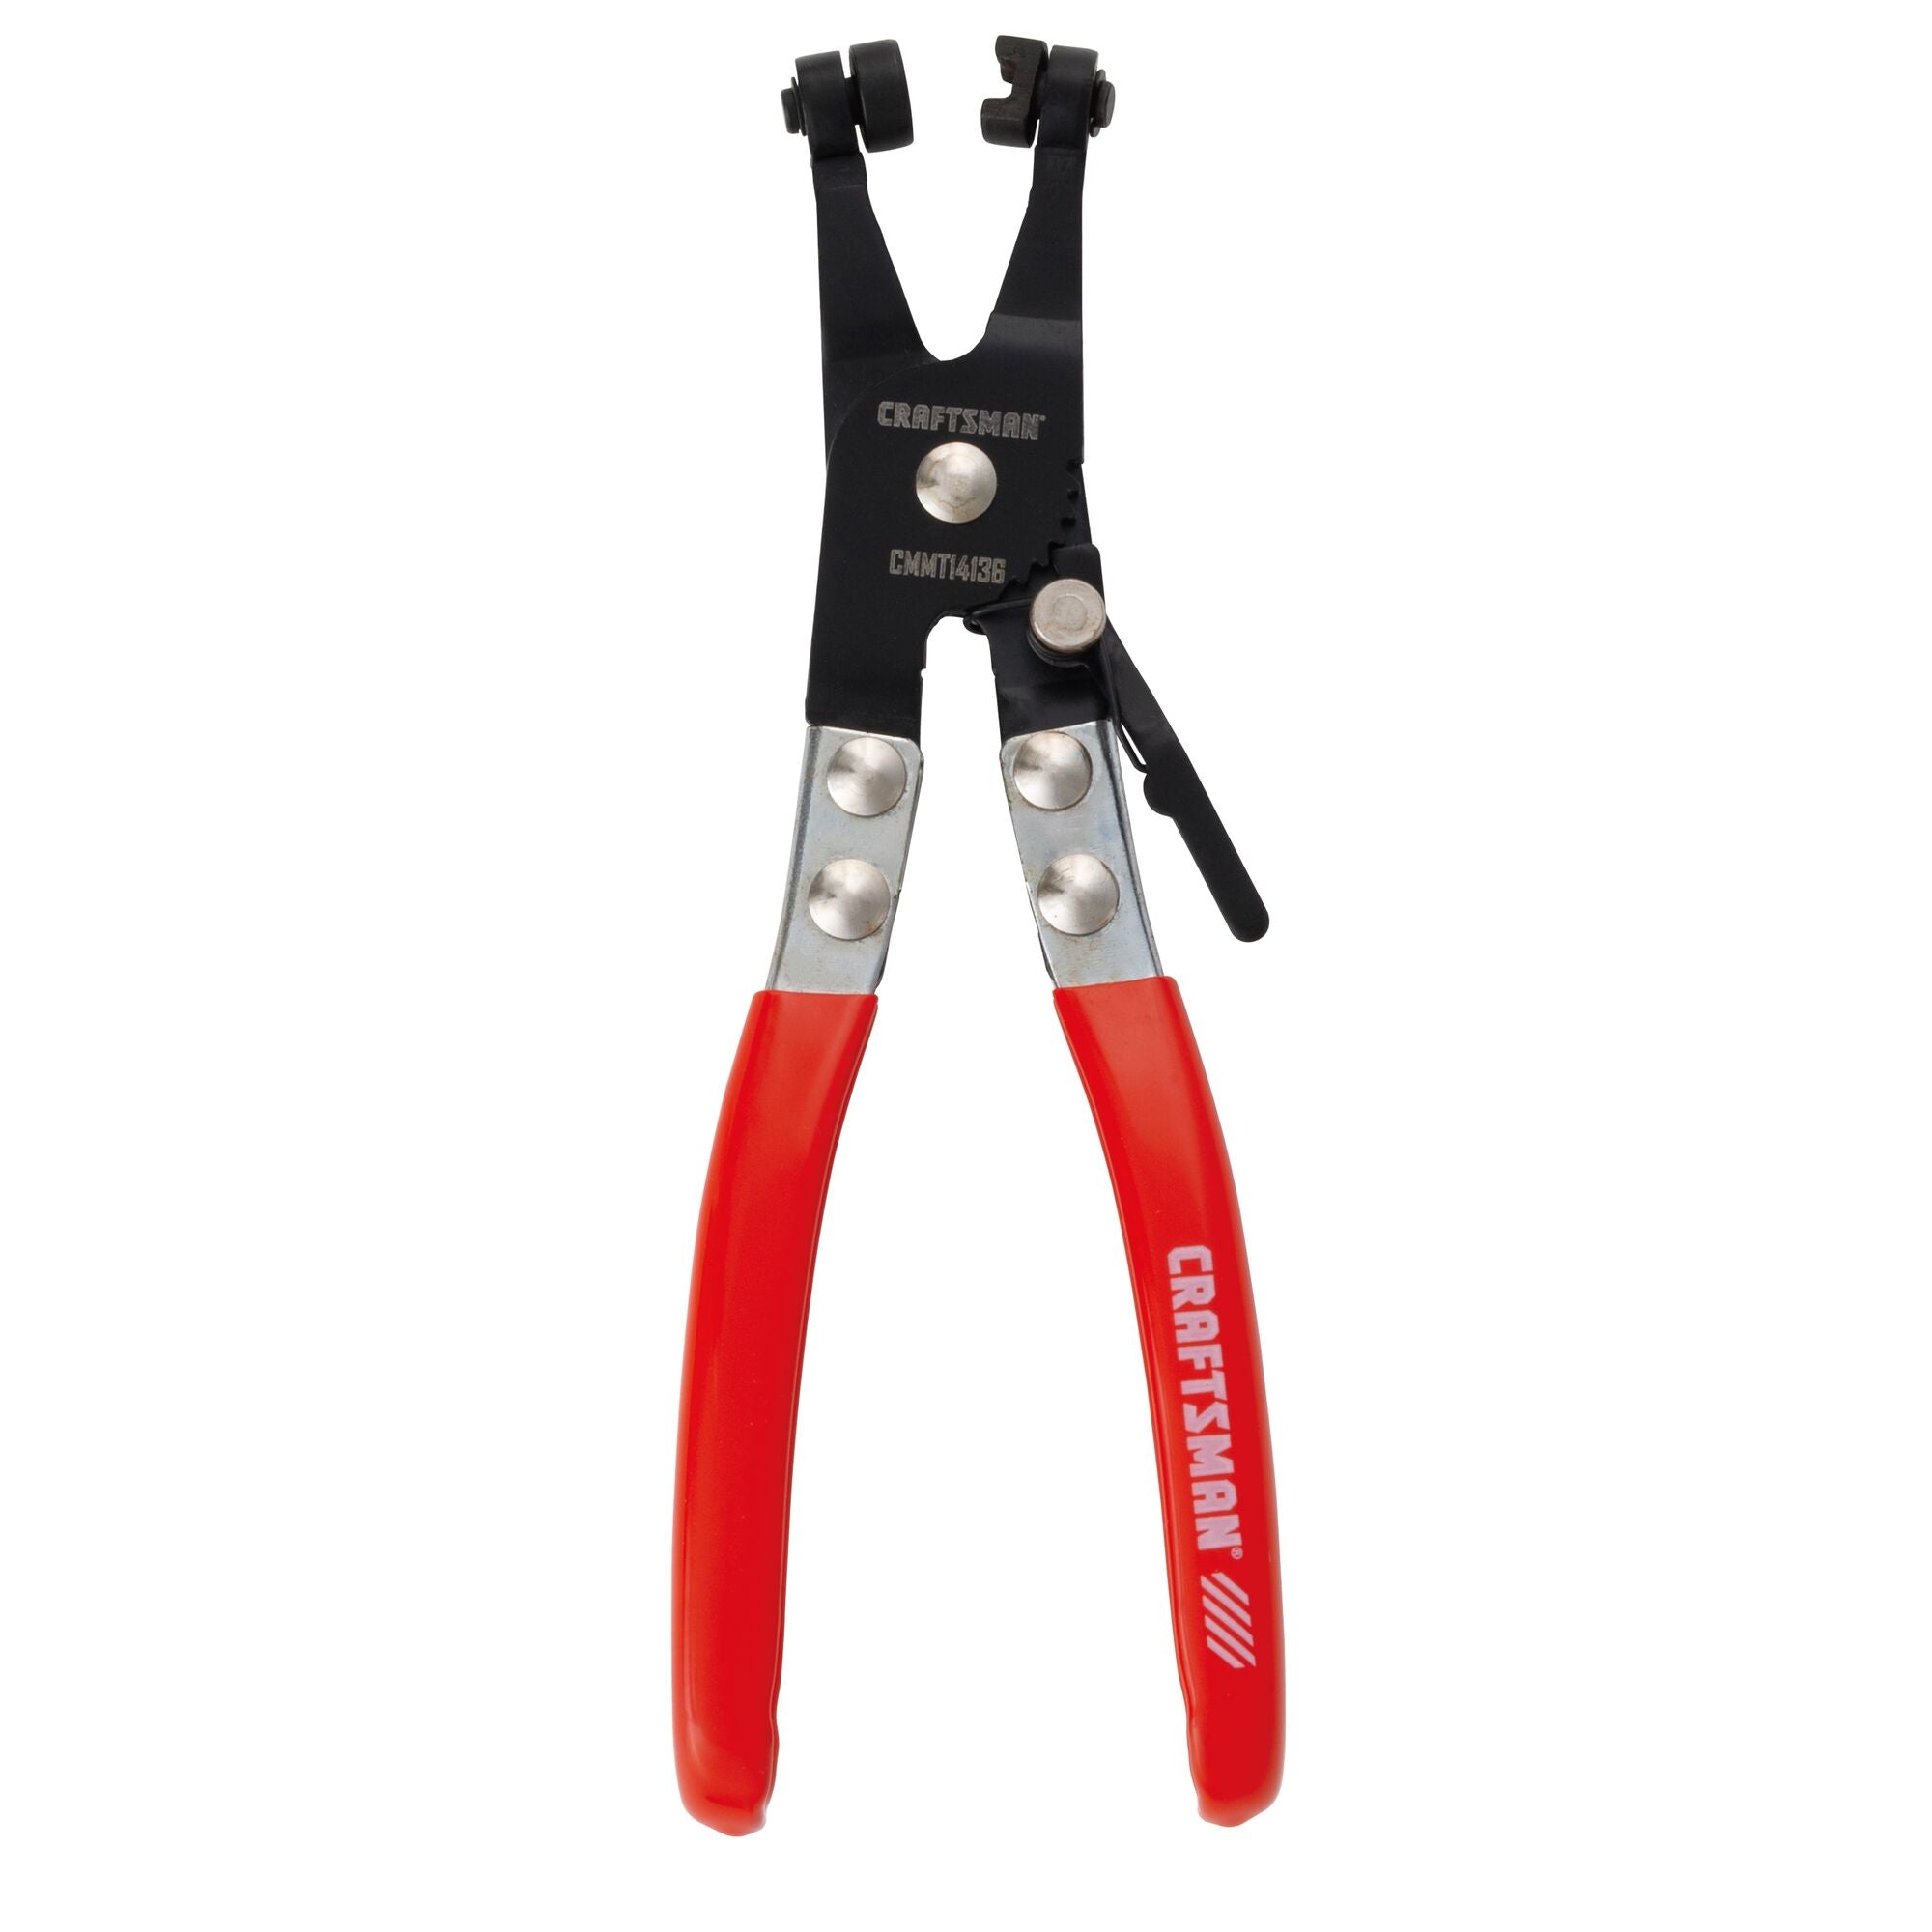 CRAFTSMAN Snap Ring Plier Set, 4-Pack, 7 inch, Straight and Curved Pliers,  Stainless Steel (CMMT98339)